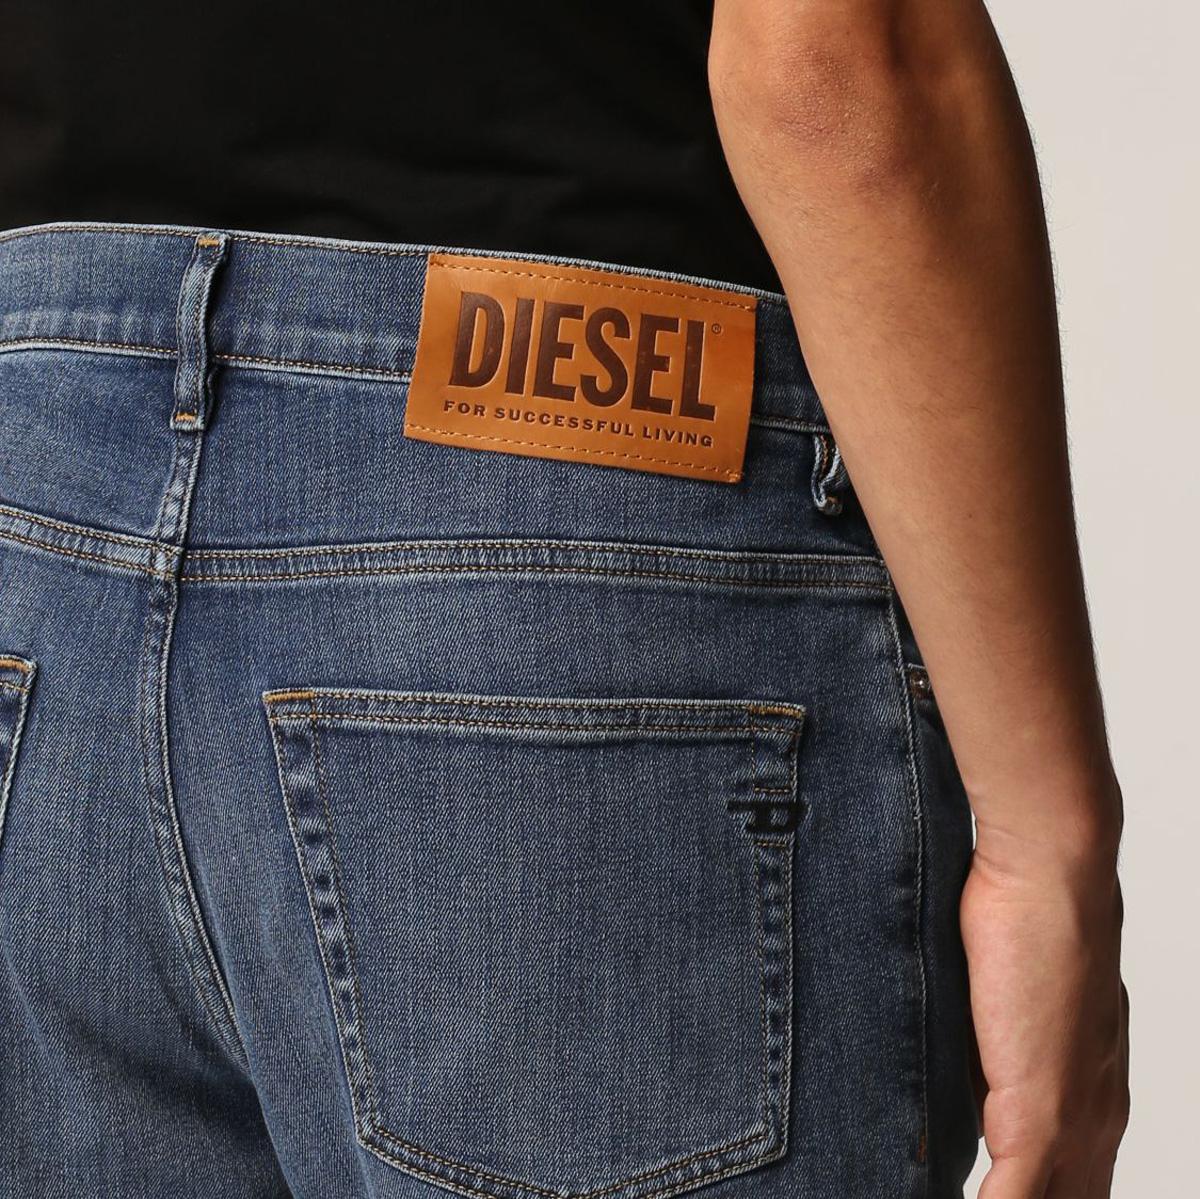 Diesel Jeans Size Chart For Men Women And Kids Size Conversion Tips